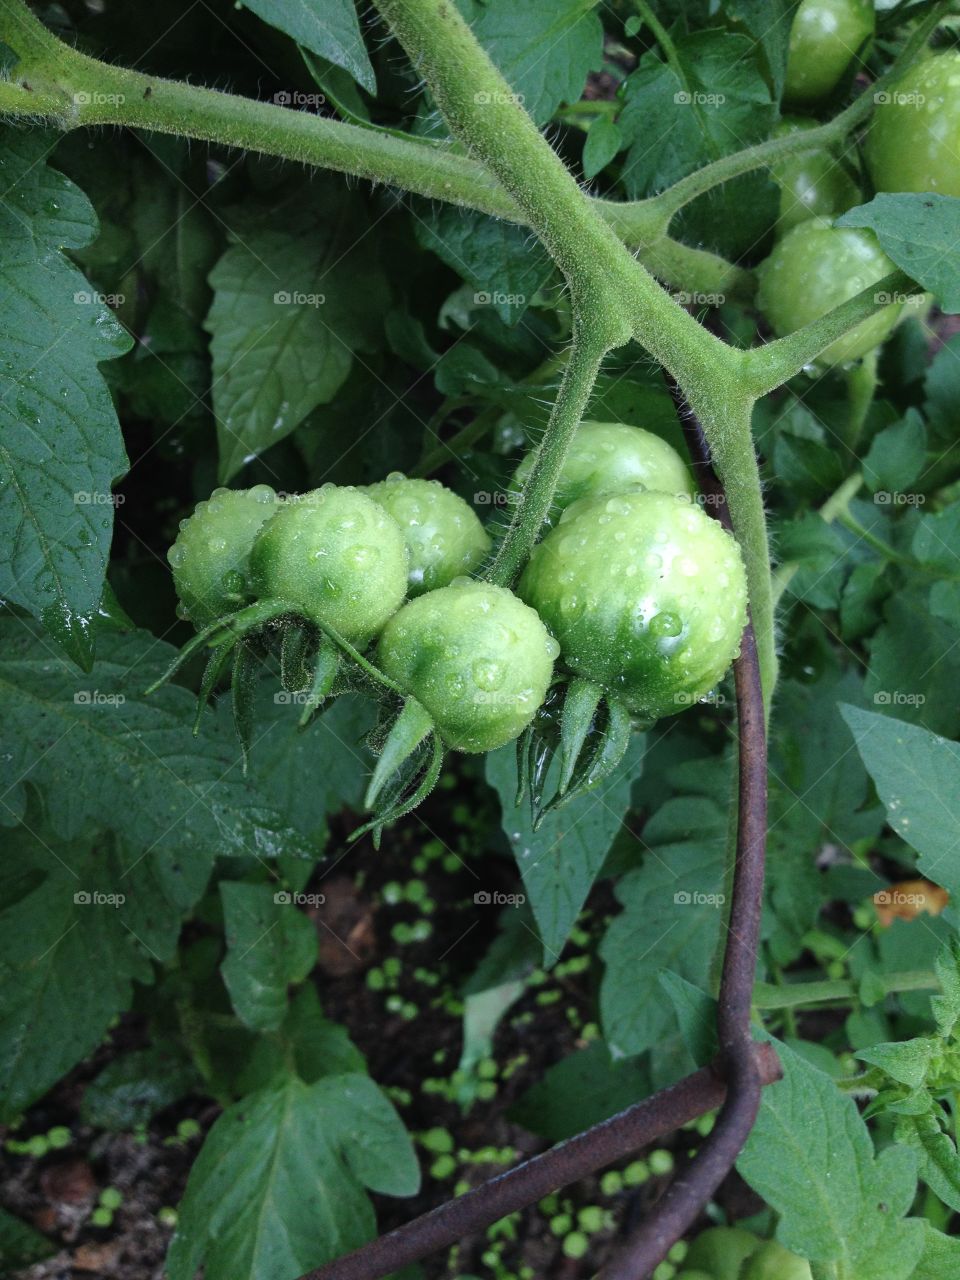 Tomatoes on the vine after a summer rain. 